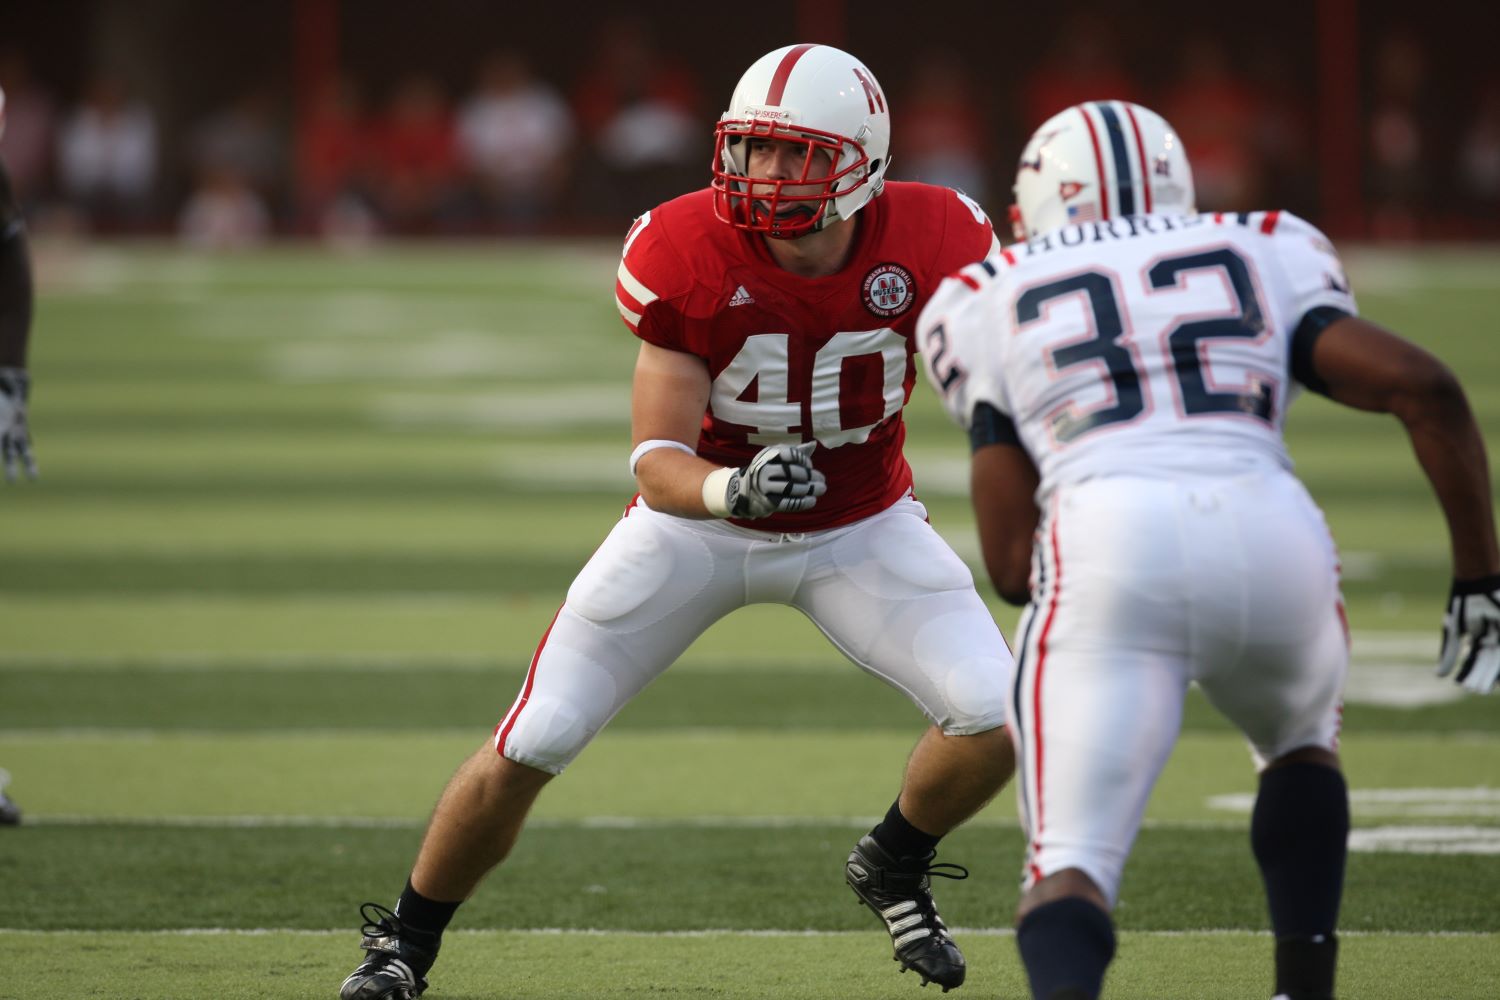 Lawrence playing linebacker for the Huskers.